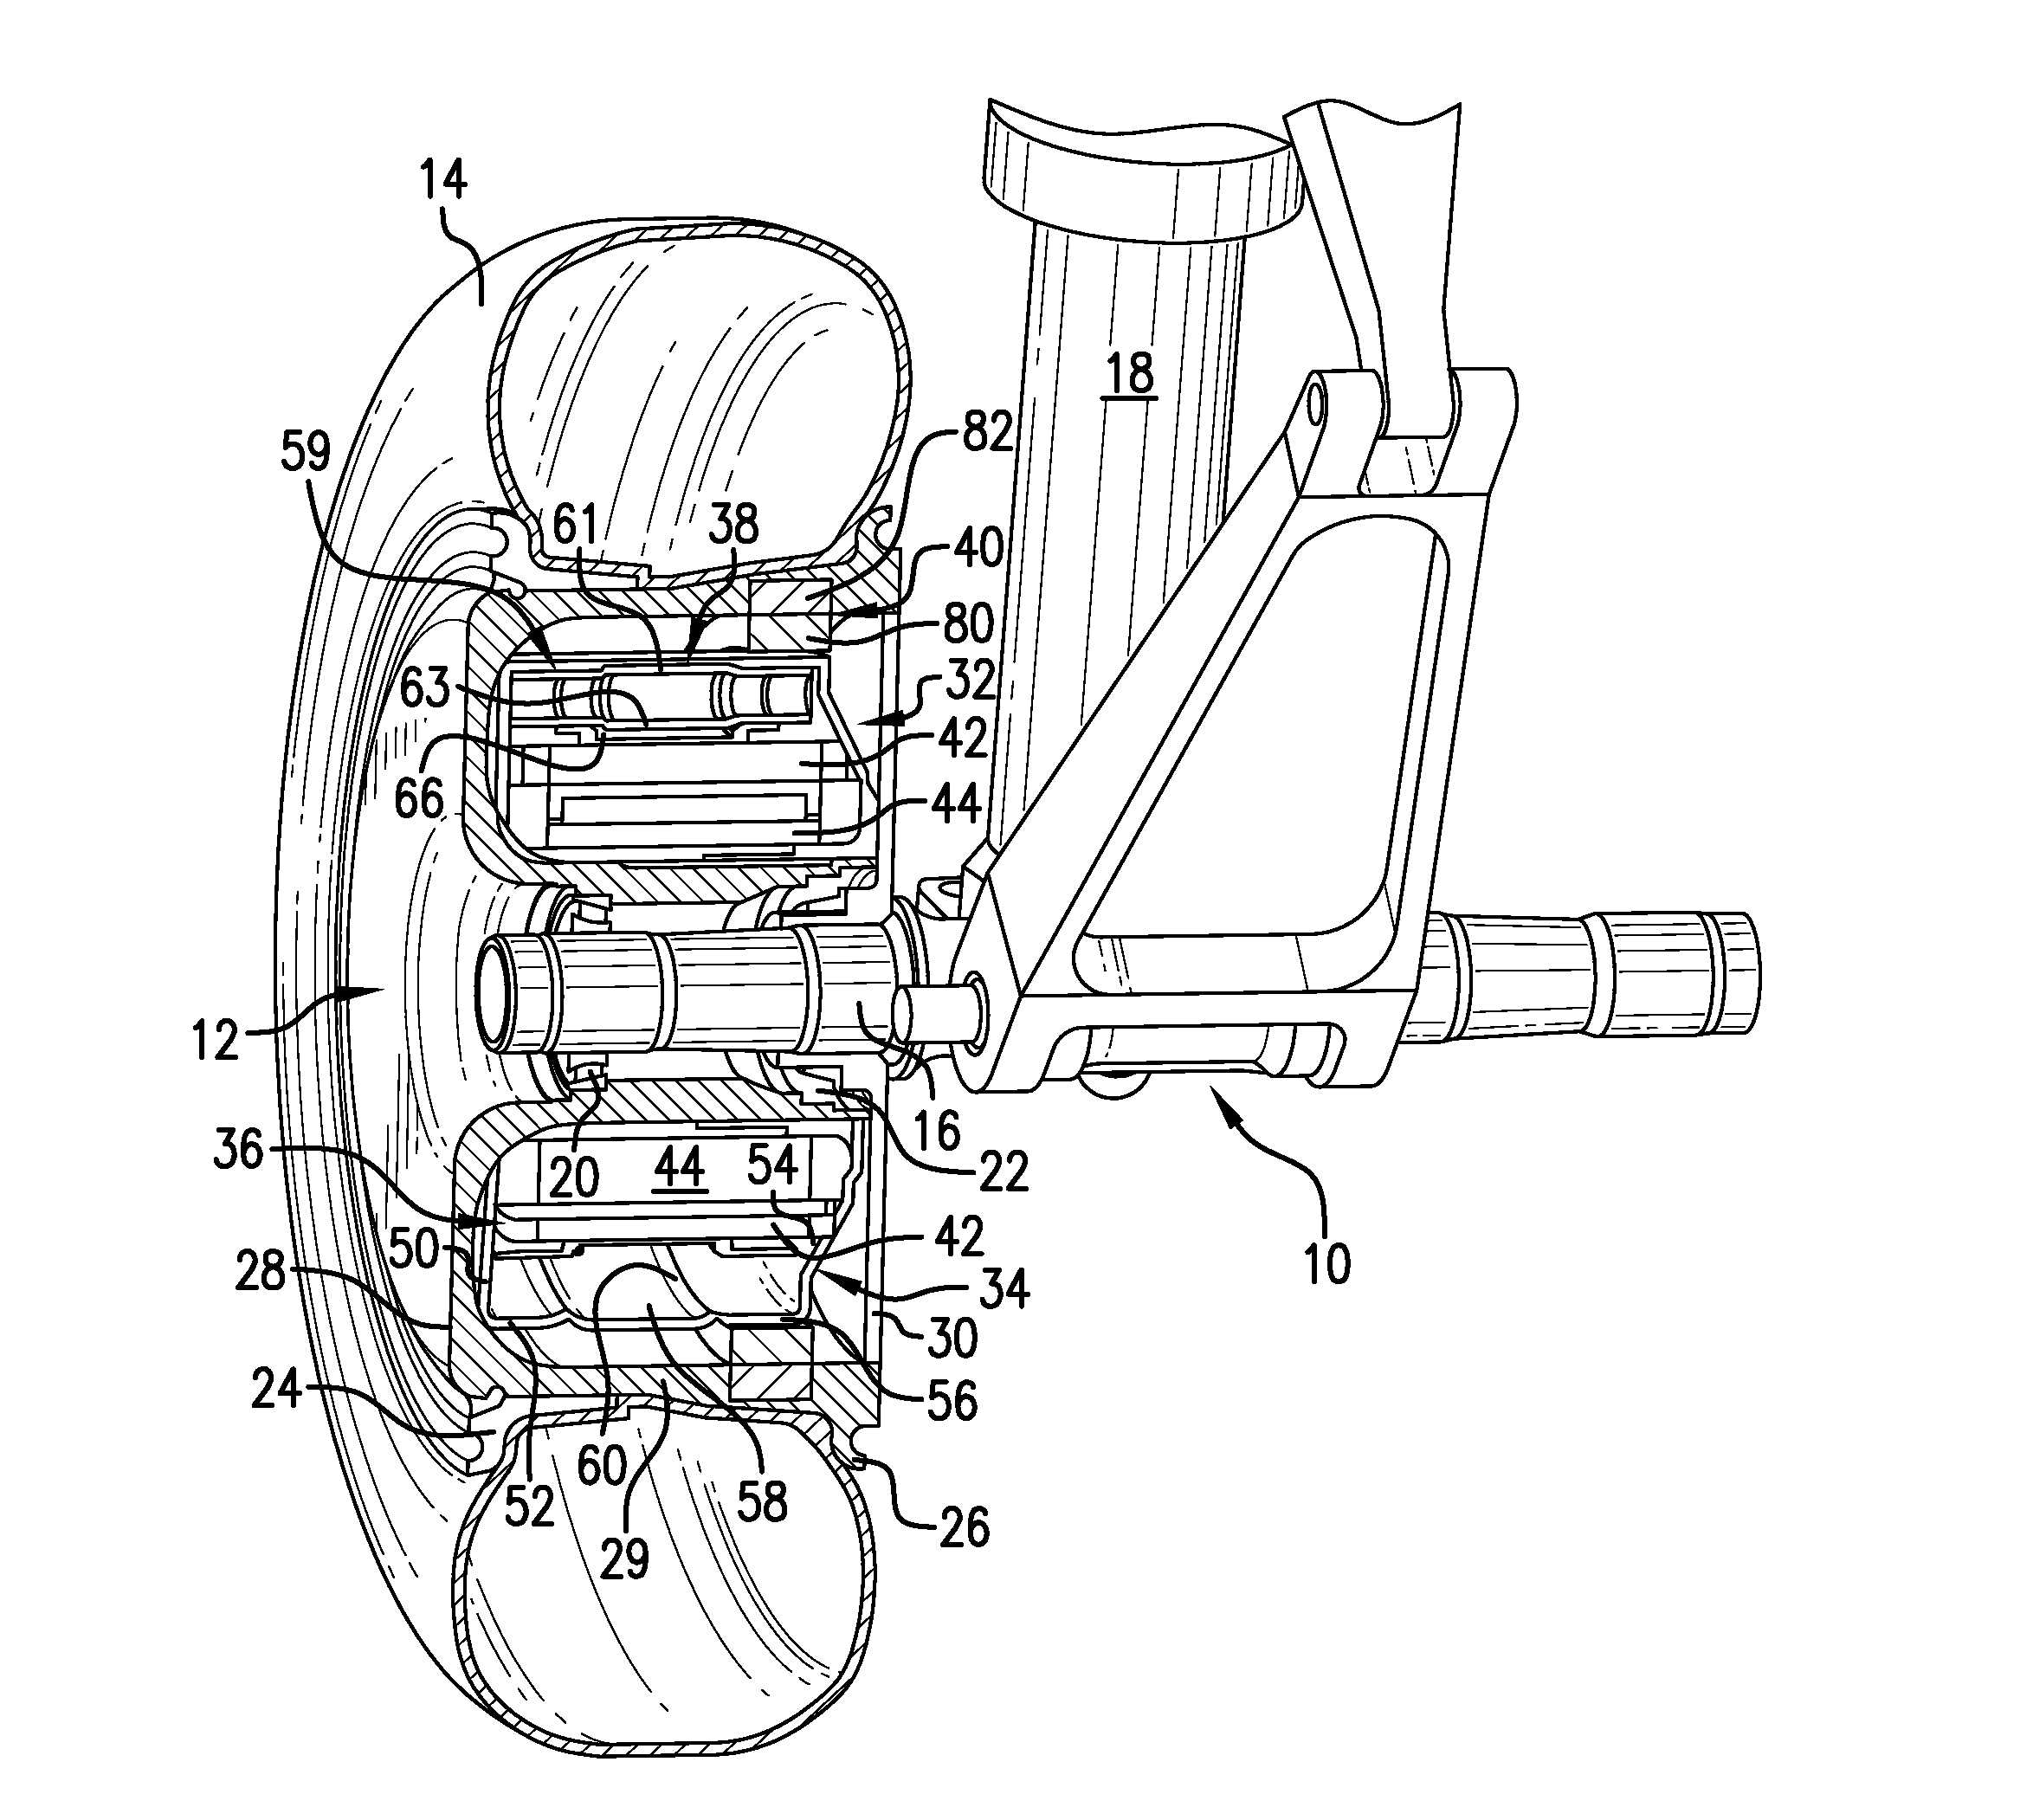 Roller Traction Drive System for an Aircraft Drive Wheel Drive System